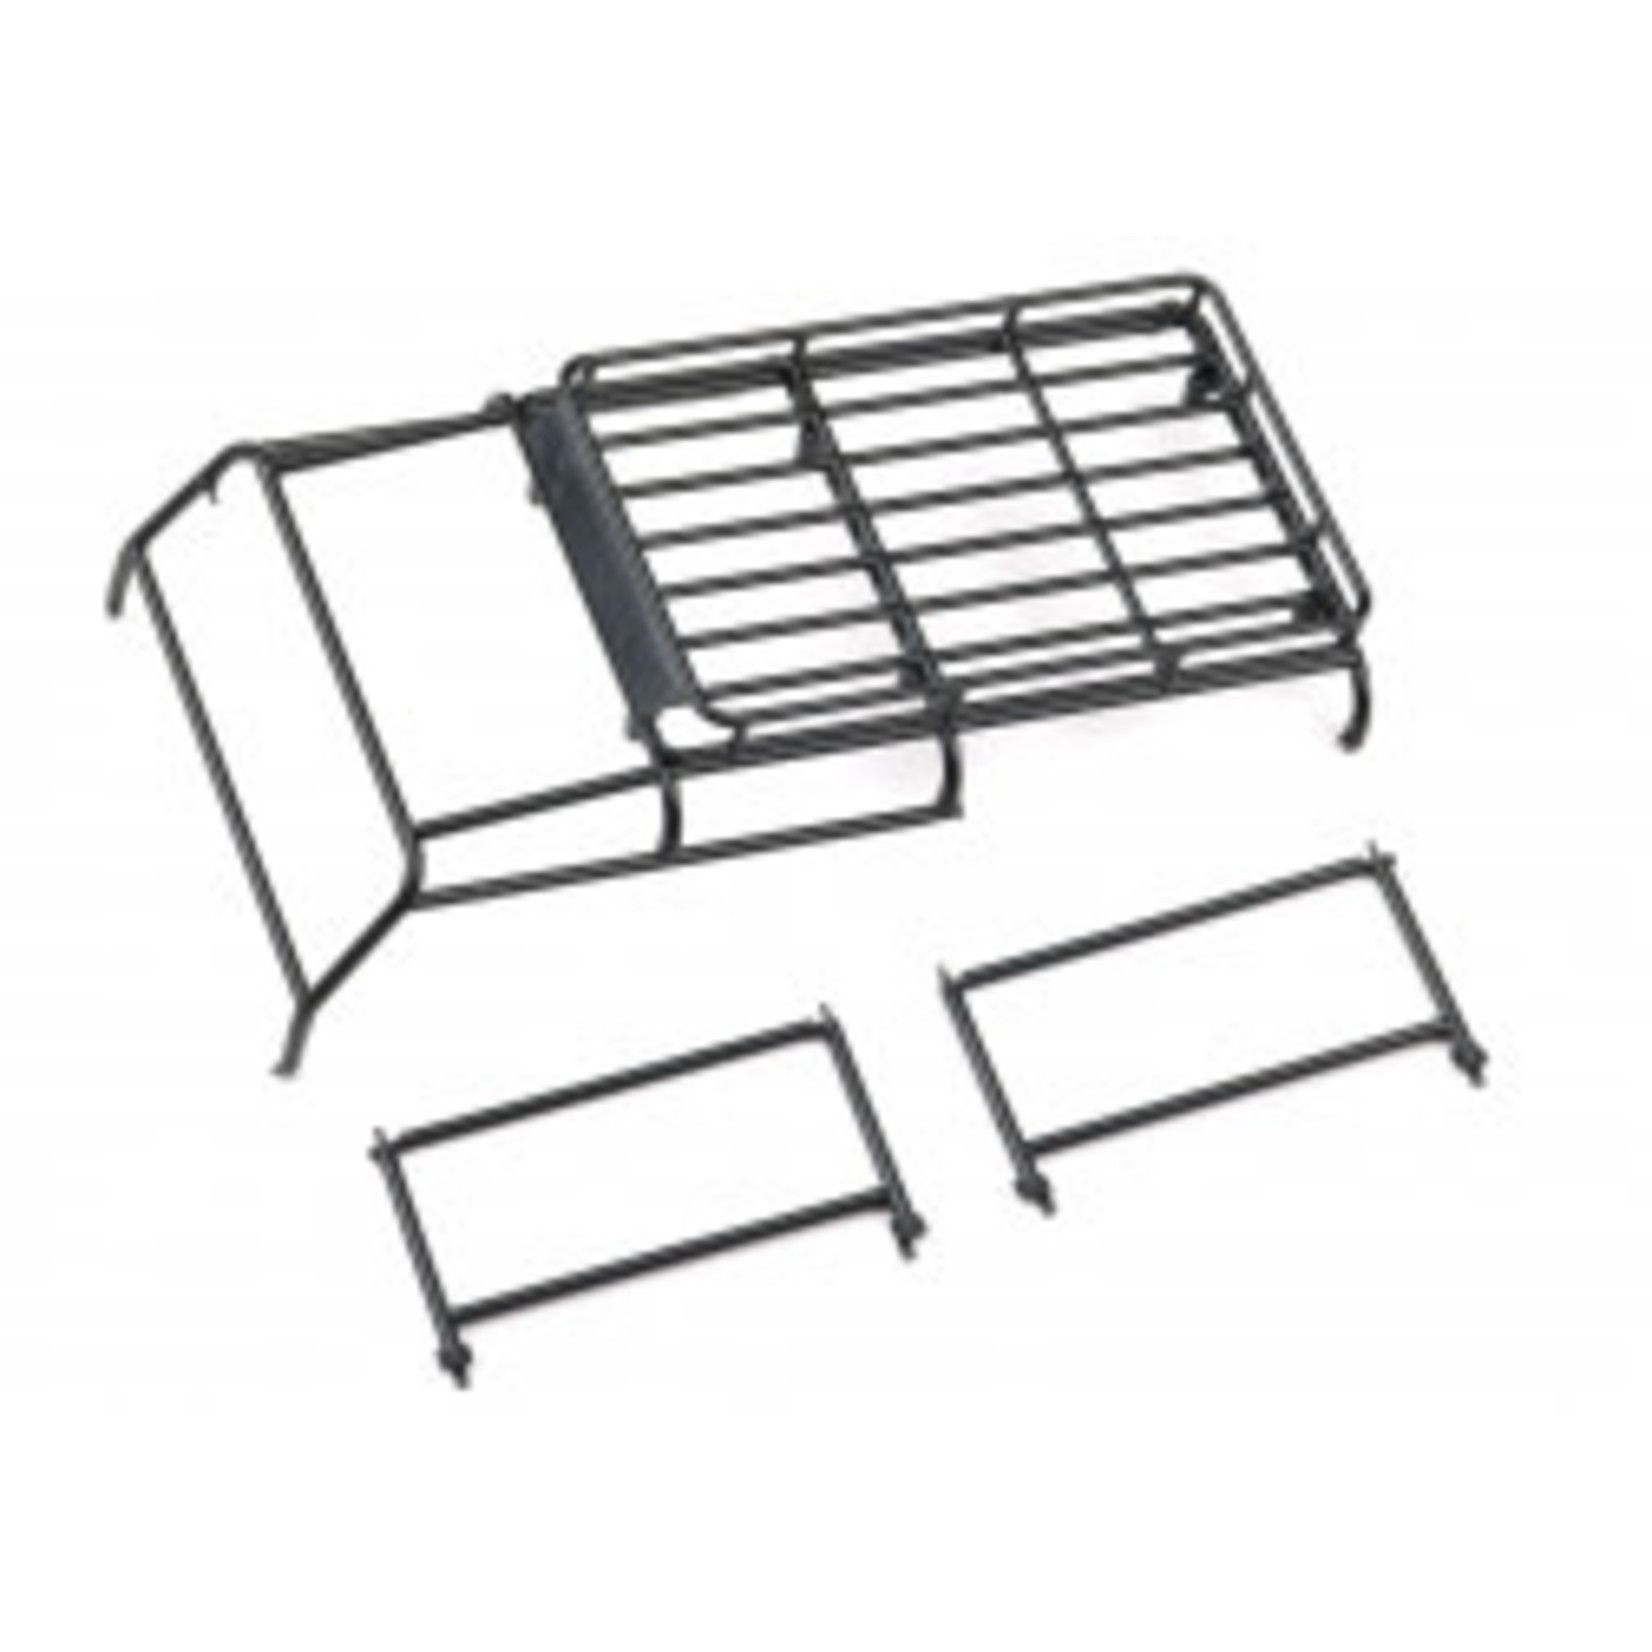 Traxxas TRX-4M ExoCage/ roof basket (top, bottom, & sides (left & right)) (fits #9712 body)